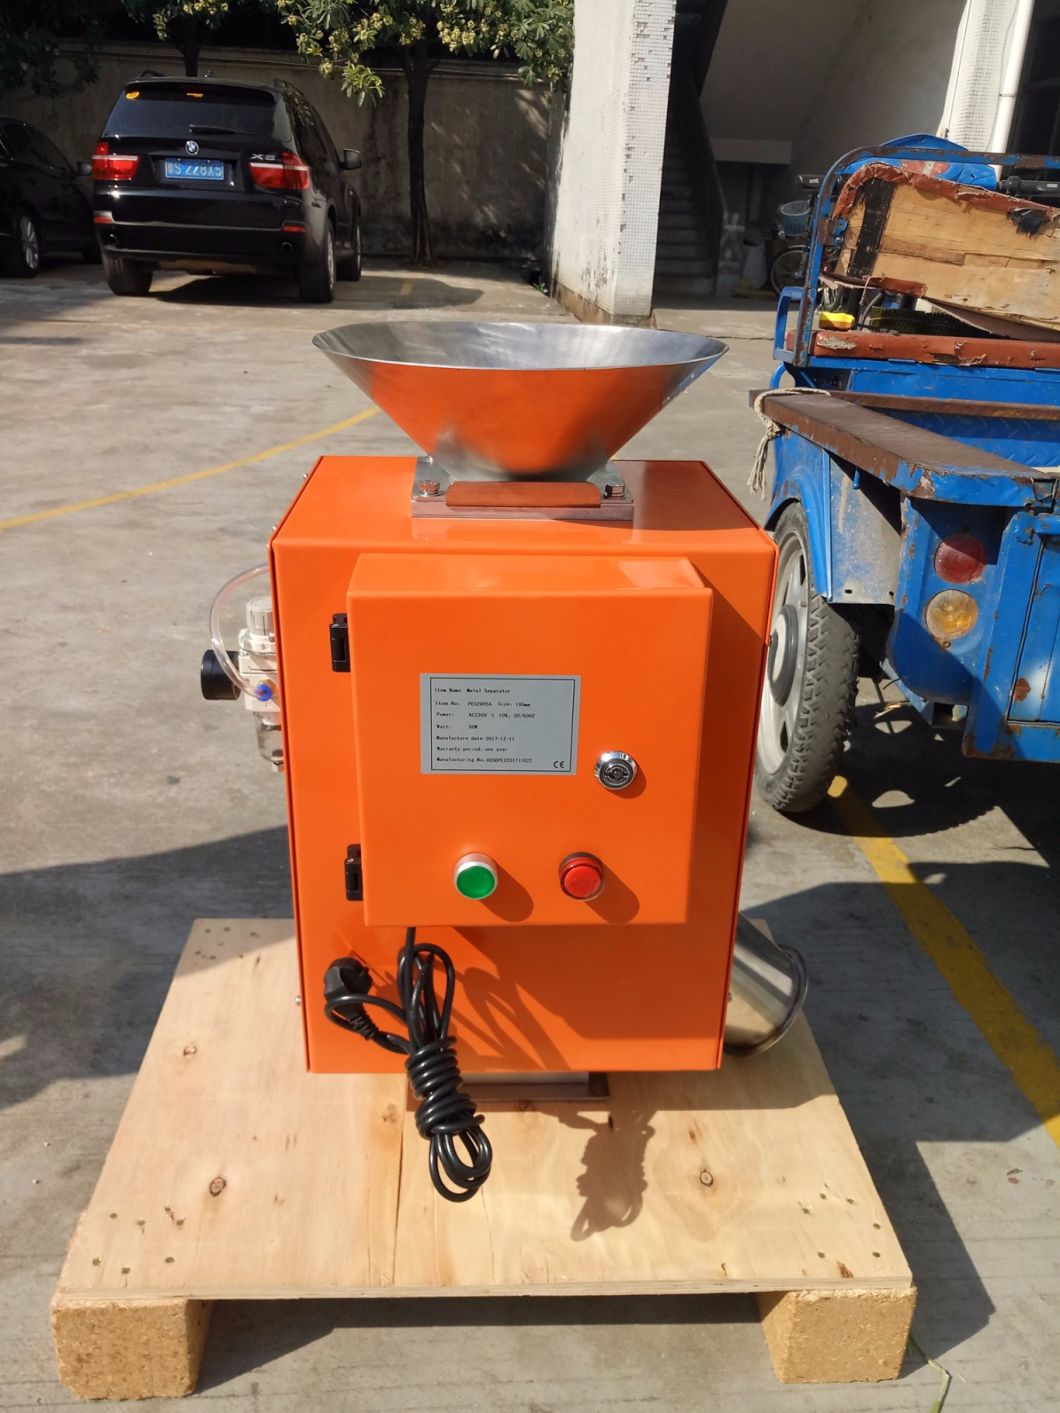 Free Fall Metal Detector for Plastic Injection Molding Machine